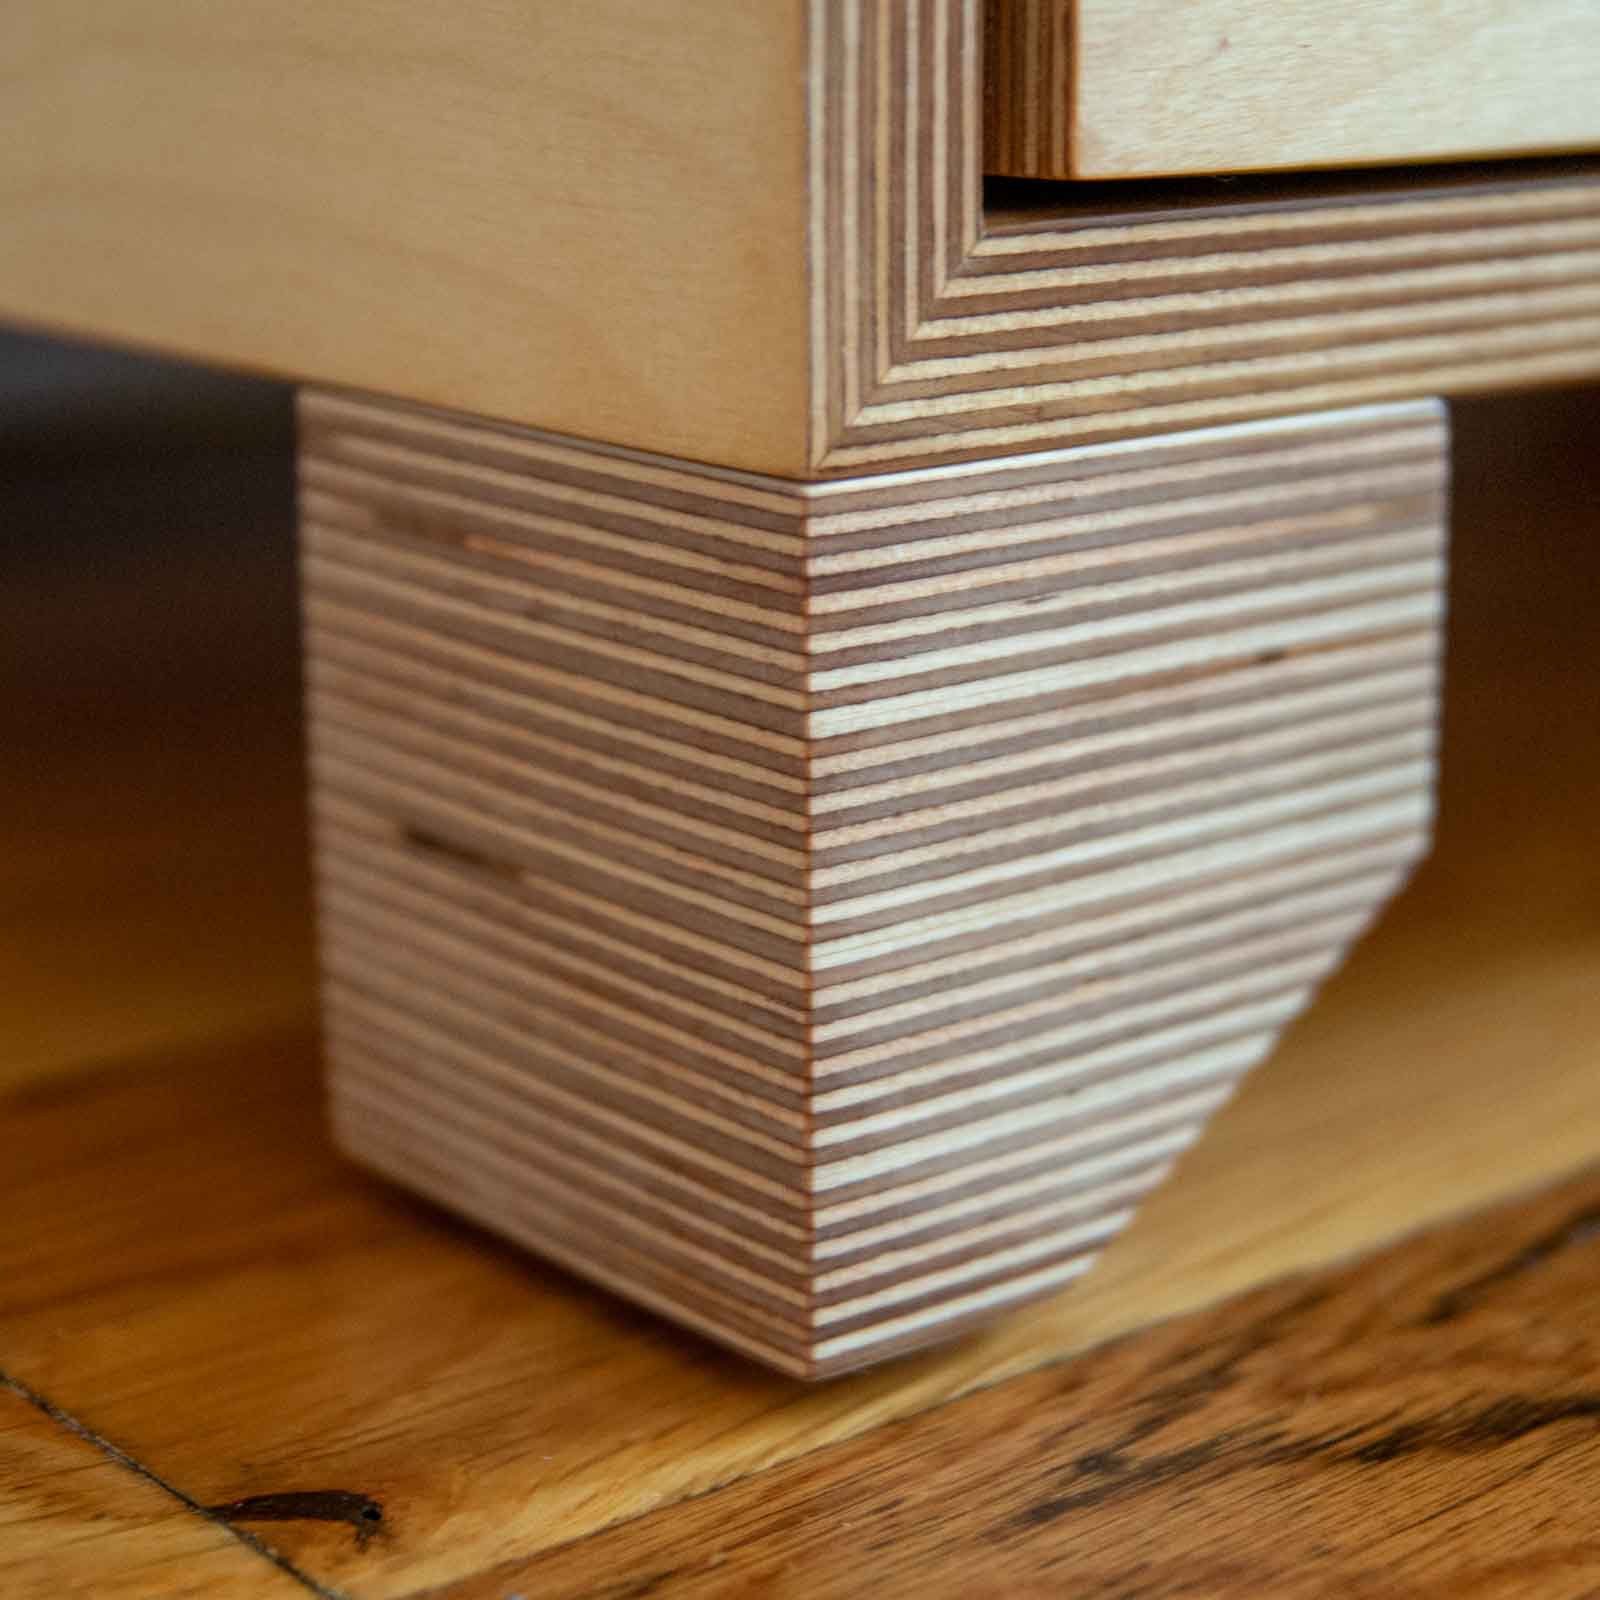 Detail of dresser feet showing baltic birch layers in a cube shape